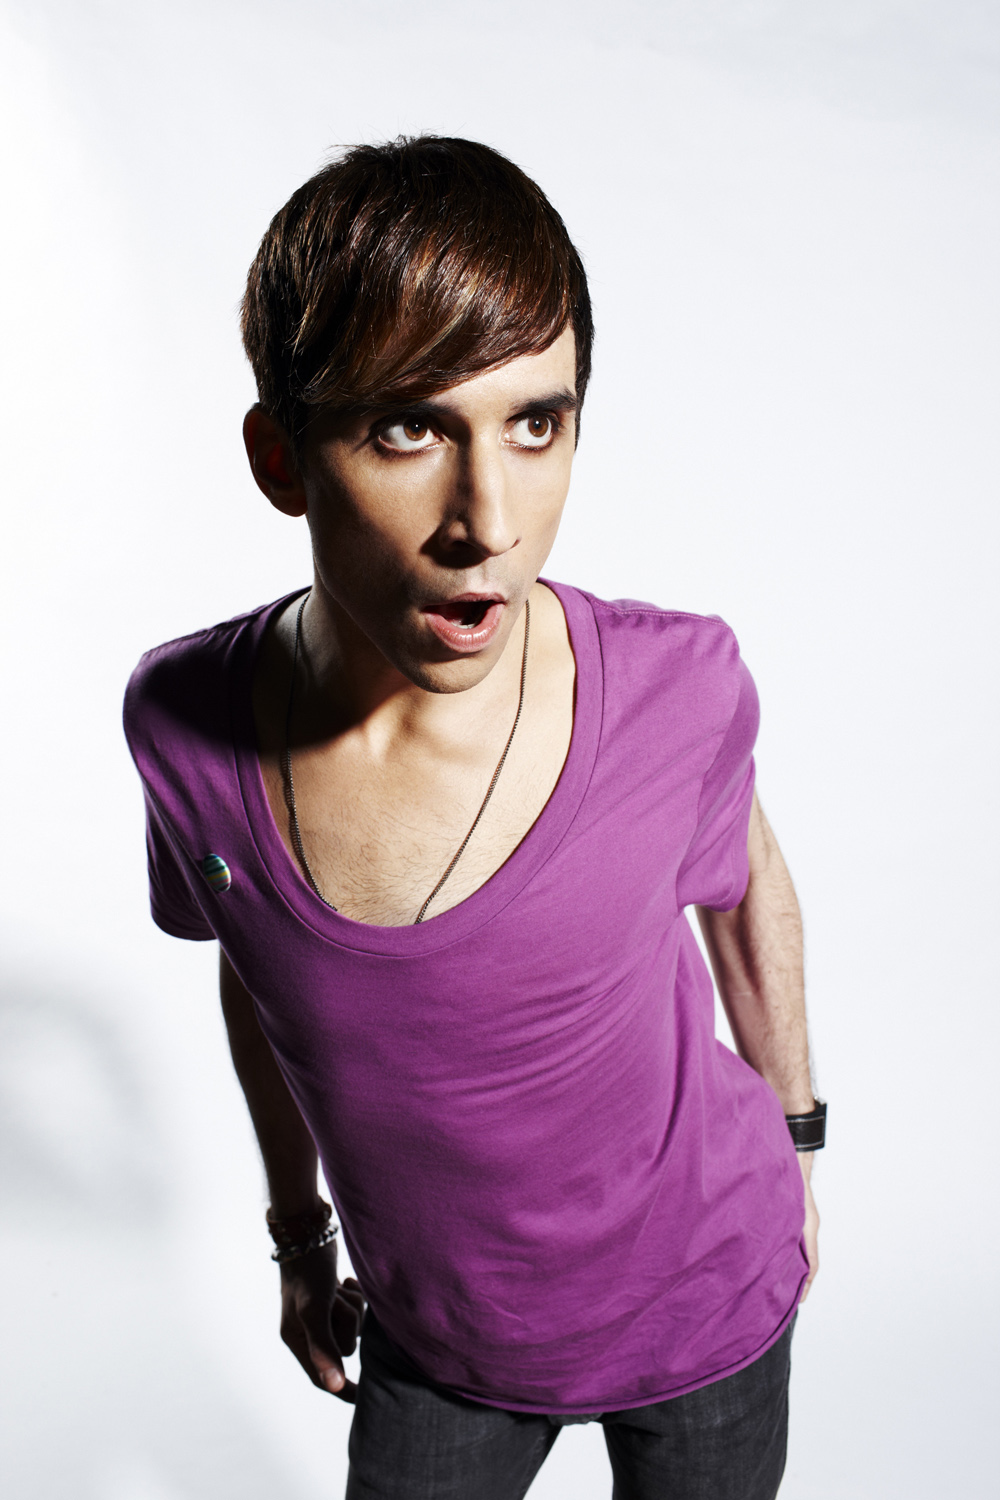 Russell Kane, Touring The Arts Desk